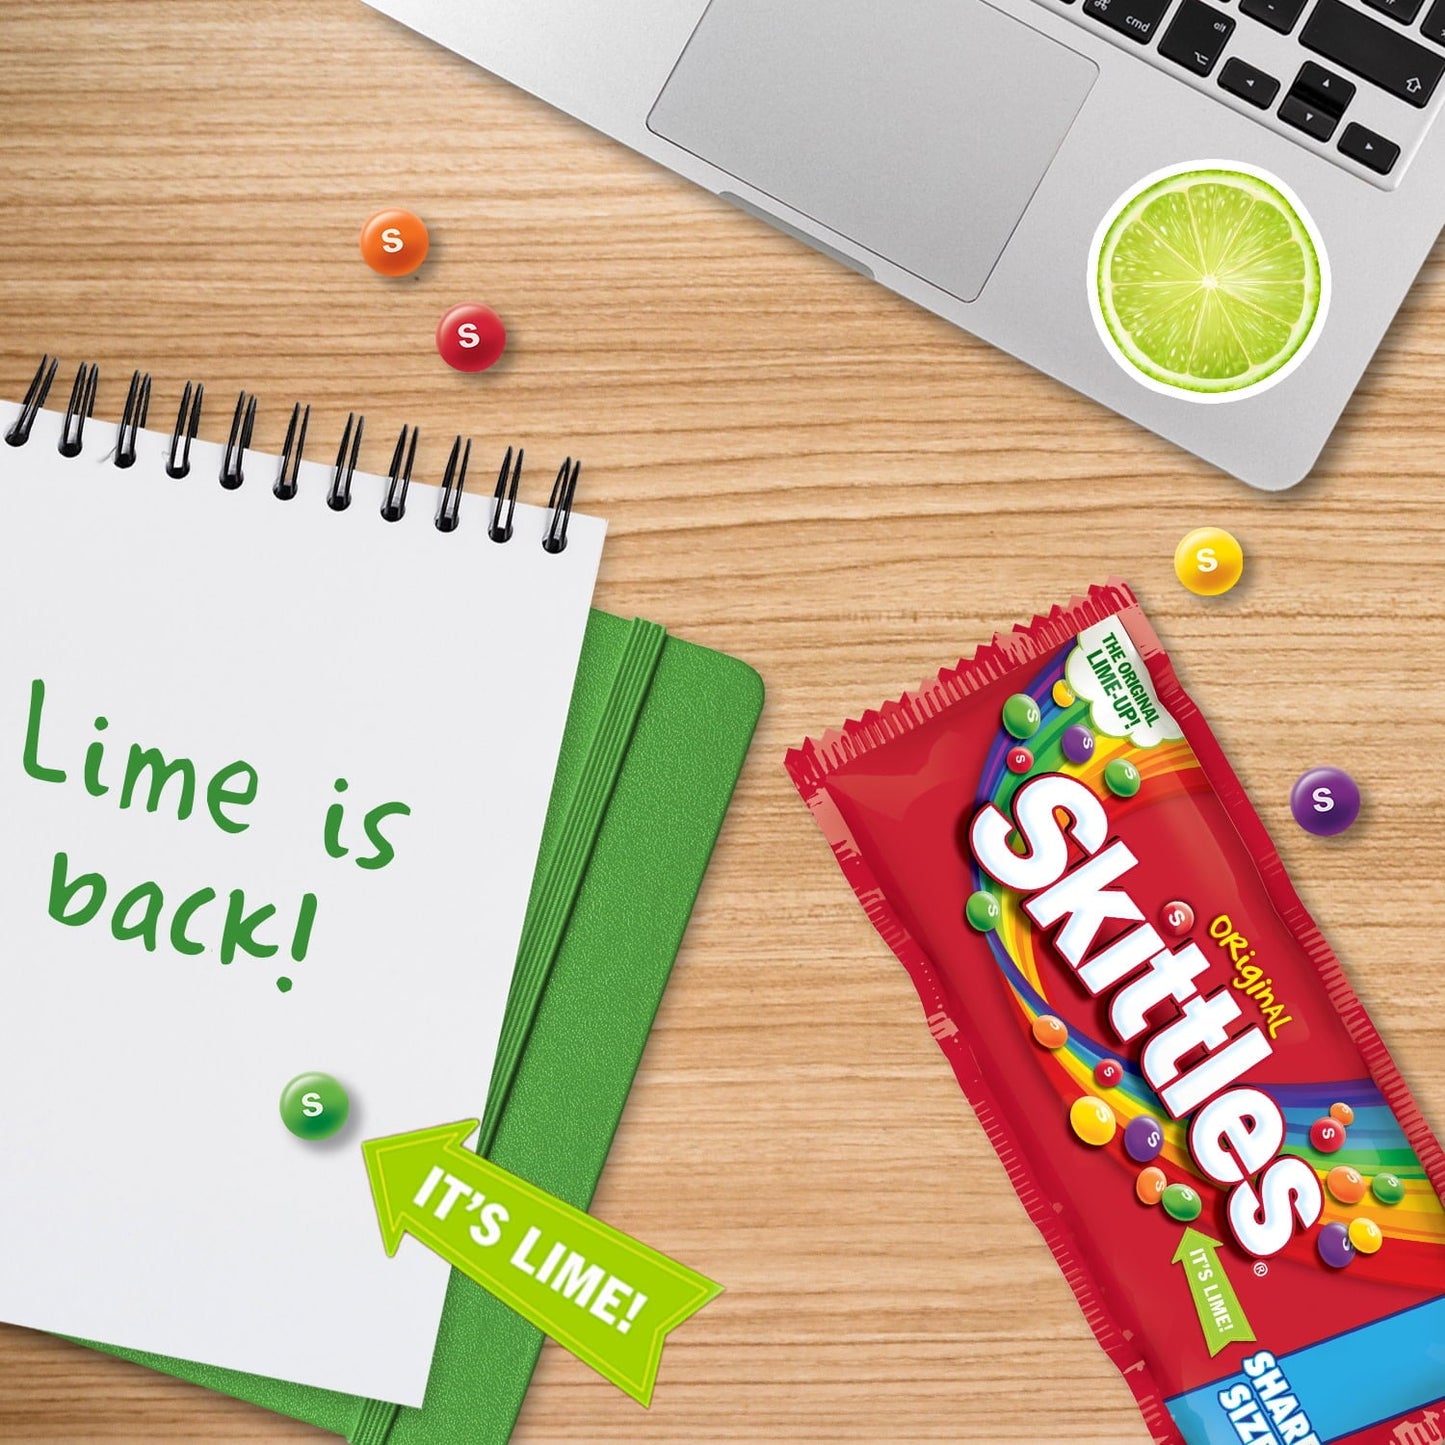 Skittles Original Chewy Candy, Share Size - 4 oz Bag